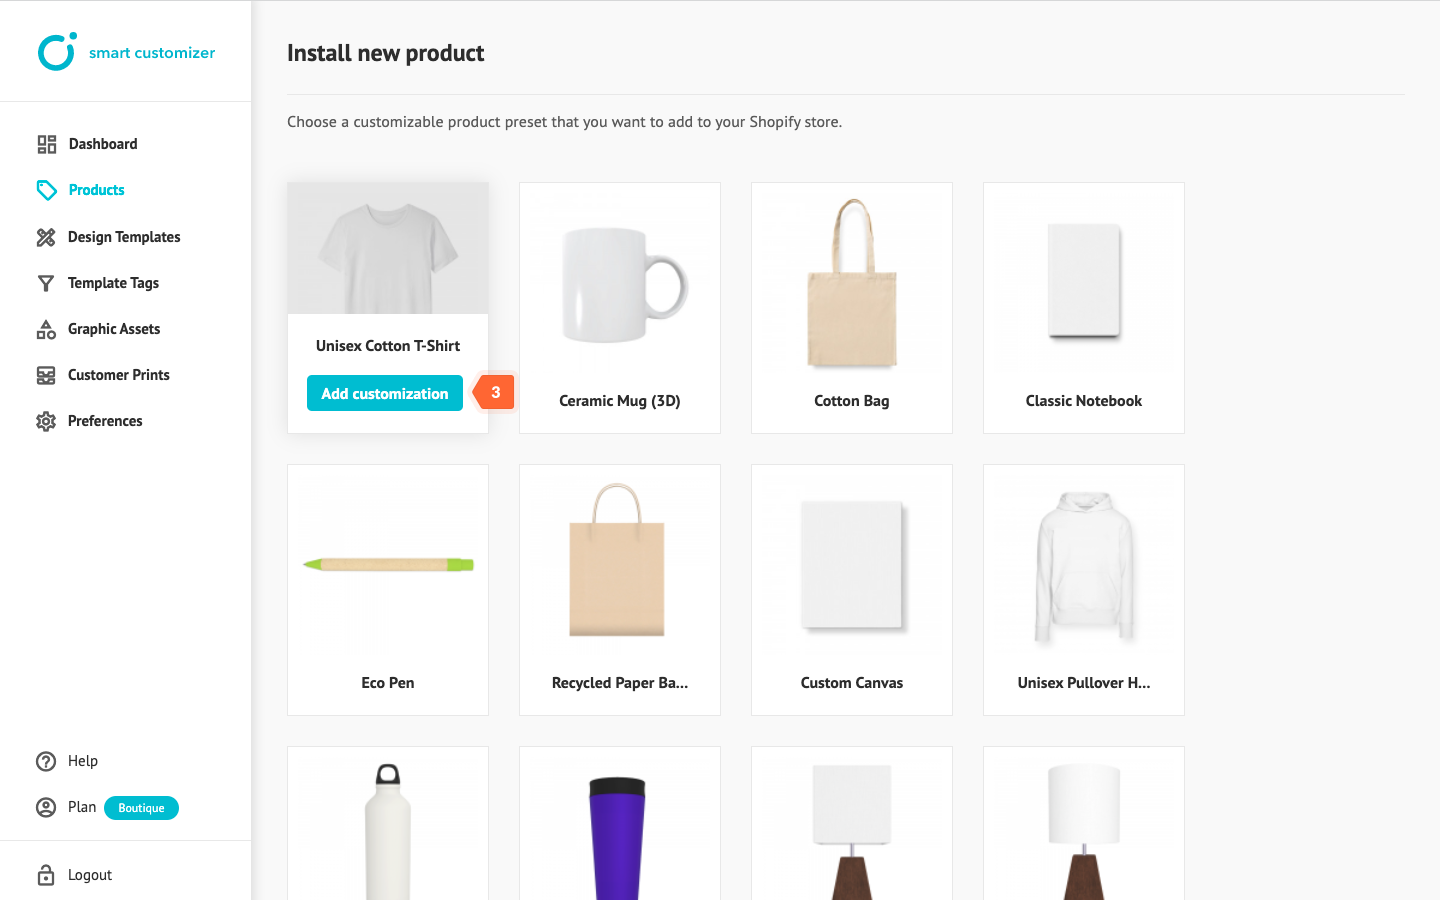 Choose a product that will be customizable